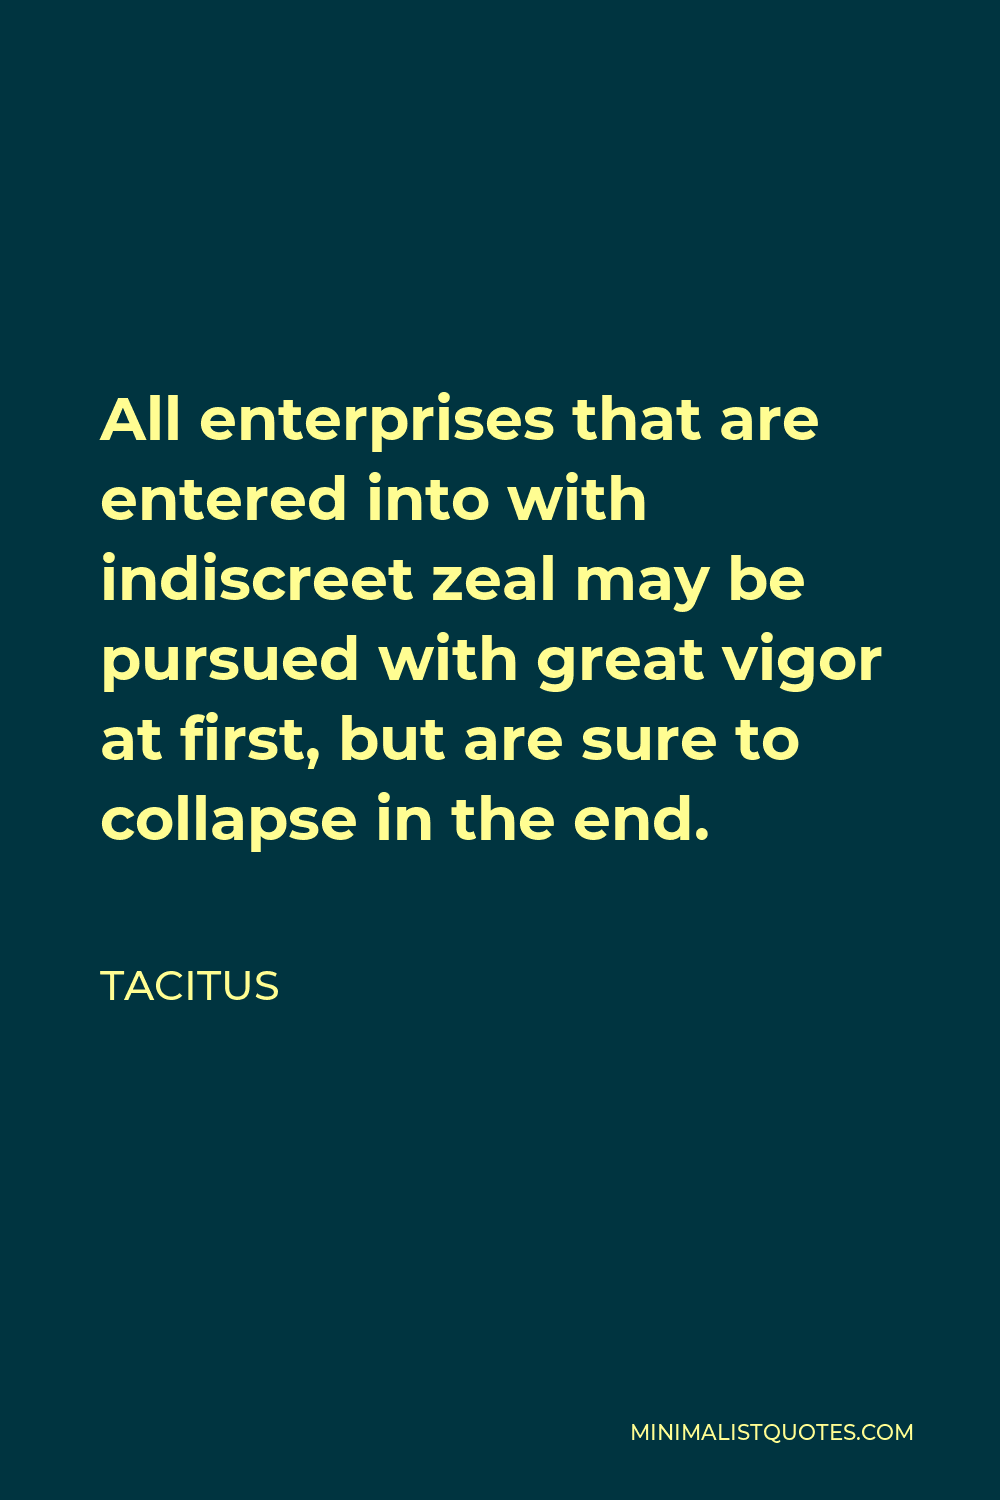 Tacitus Quote - All enterprises that are entered into with indiscreet zeal may be pursued with great vigor at first, but are sure to collapse in the end.